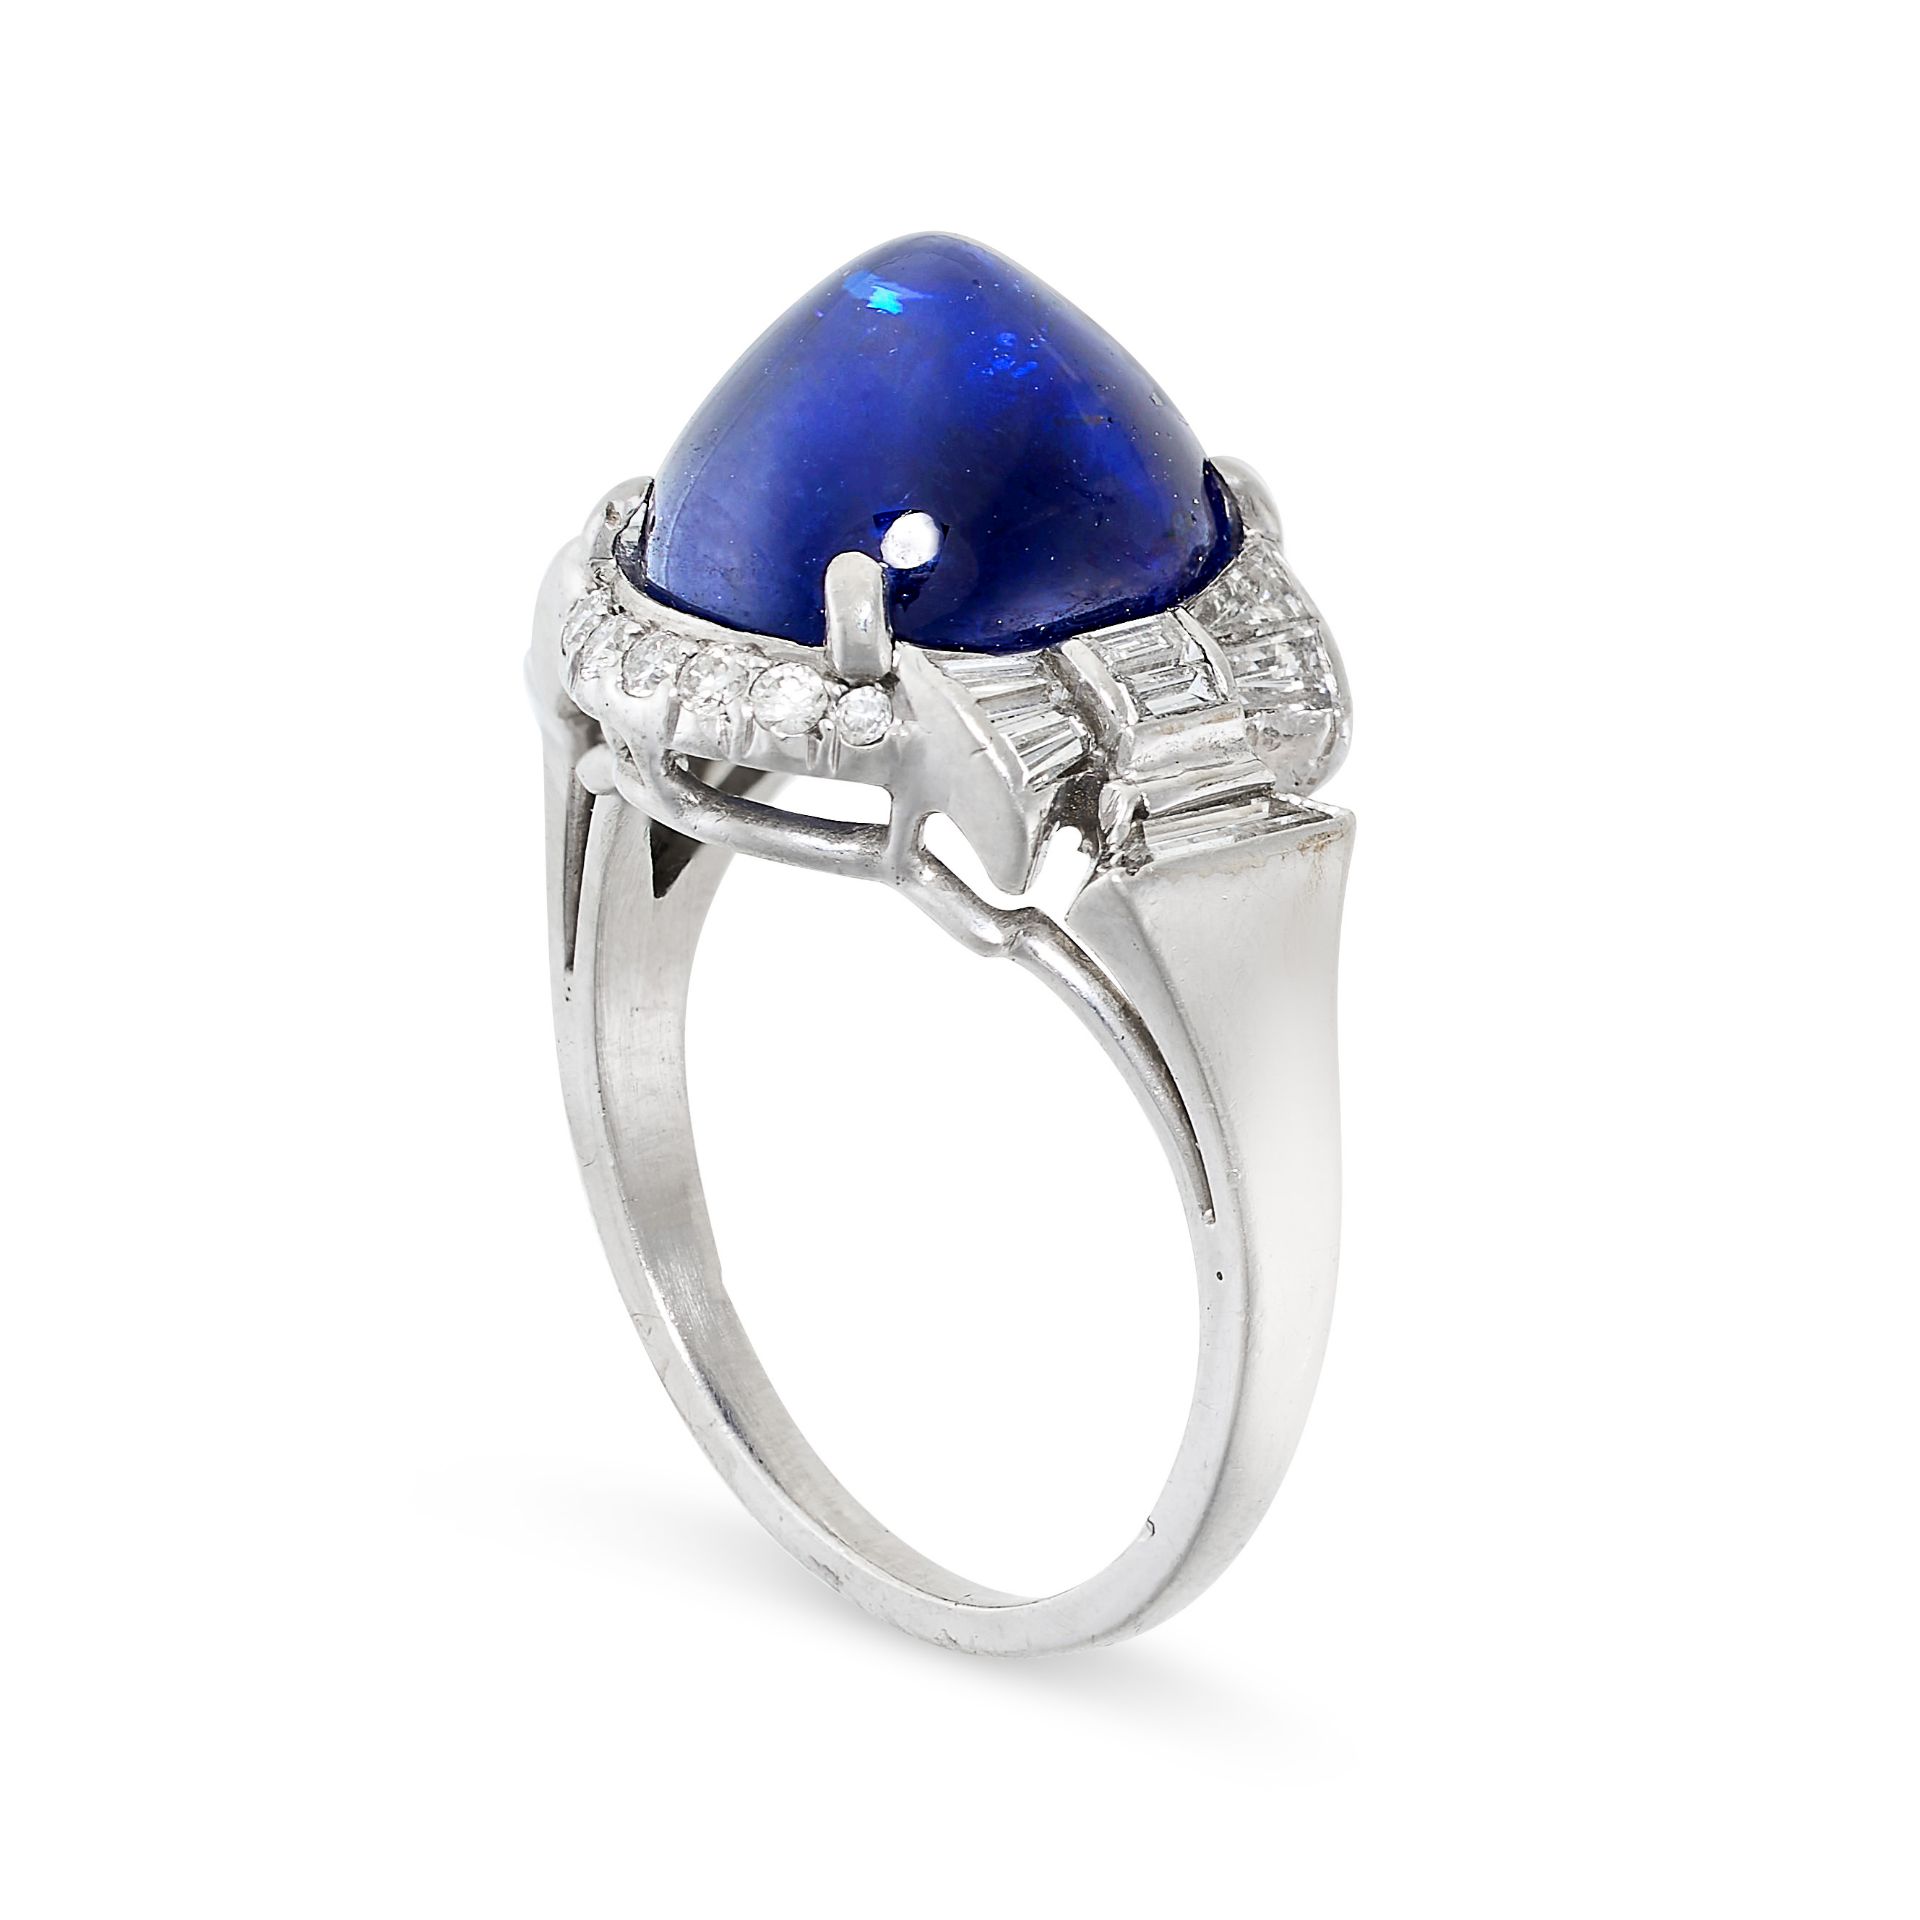 A SAPPHIRE AND DIAMOND RING set with a sugarloaf cabochon sapphire of 6.30 carats, accented by round - Bild 2 aus 2